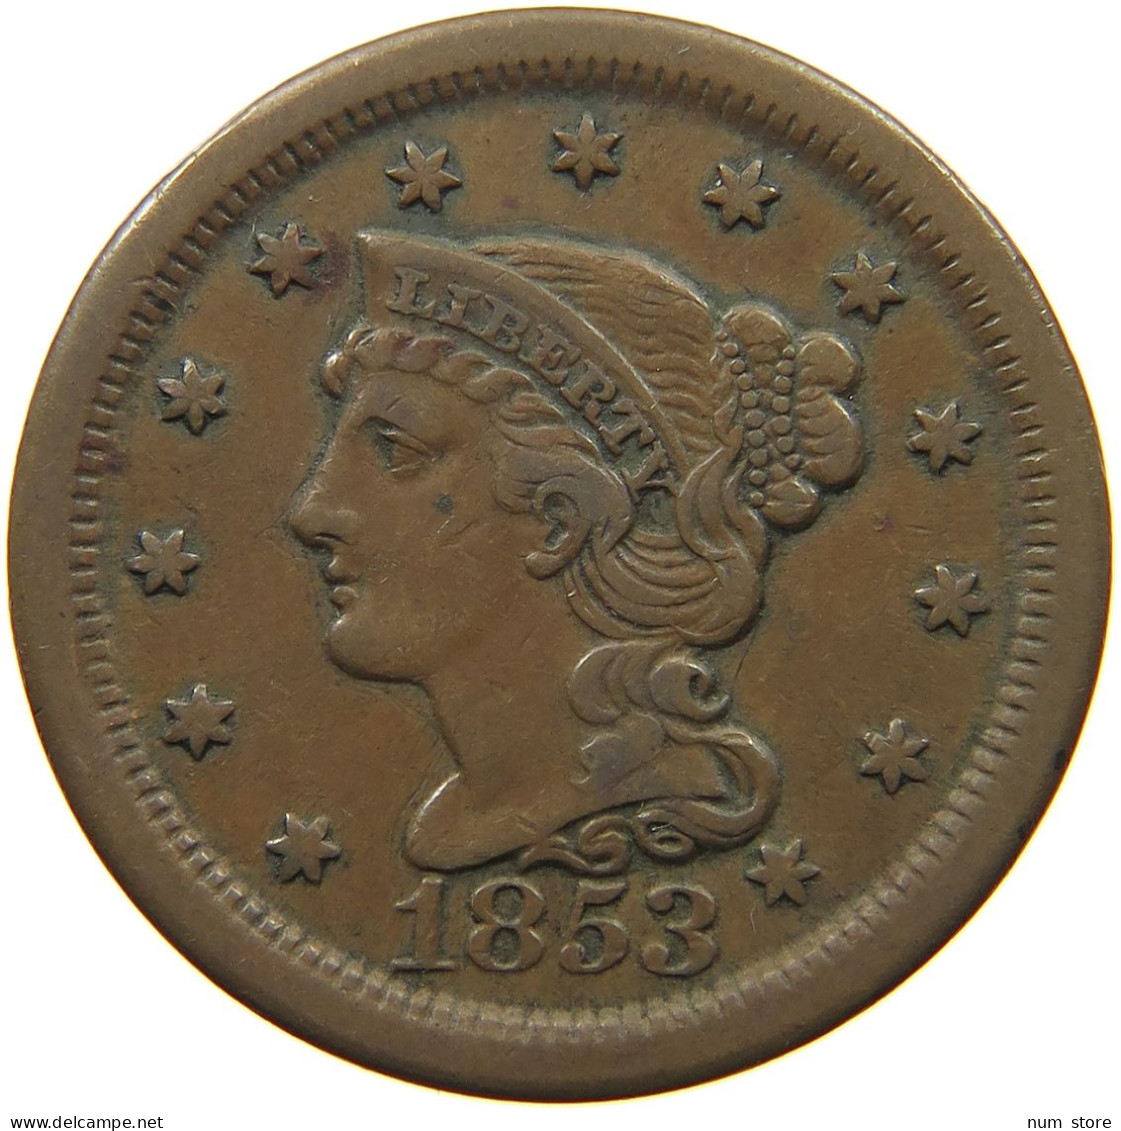 UNITED STATES OF AMERICA LARGE CENT 1853 BRAIDED HAIR #t141 0269 - 1840-1857: Braided Hair